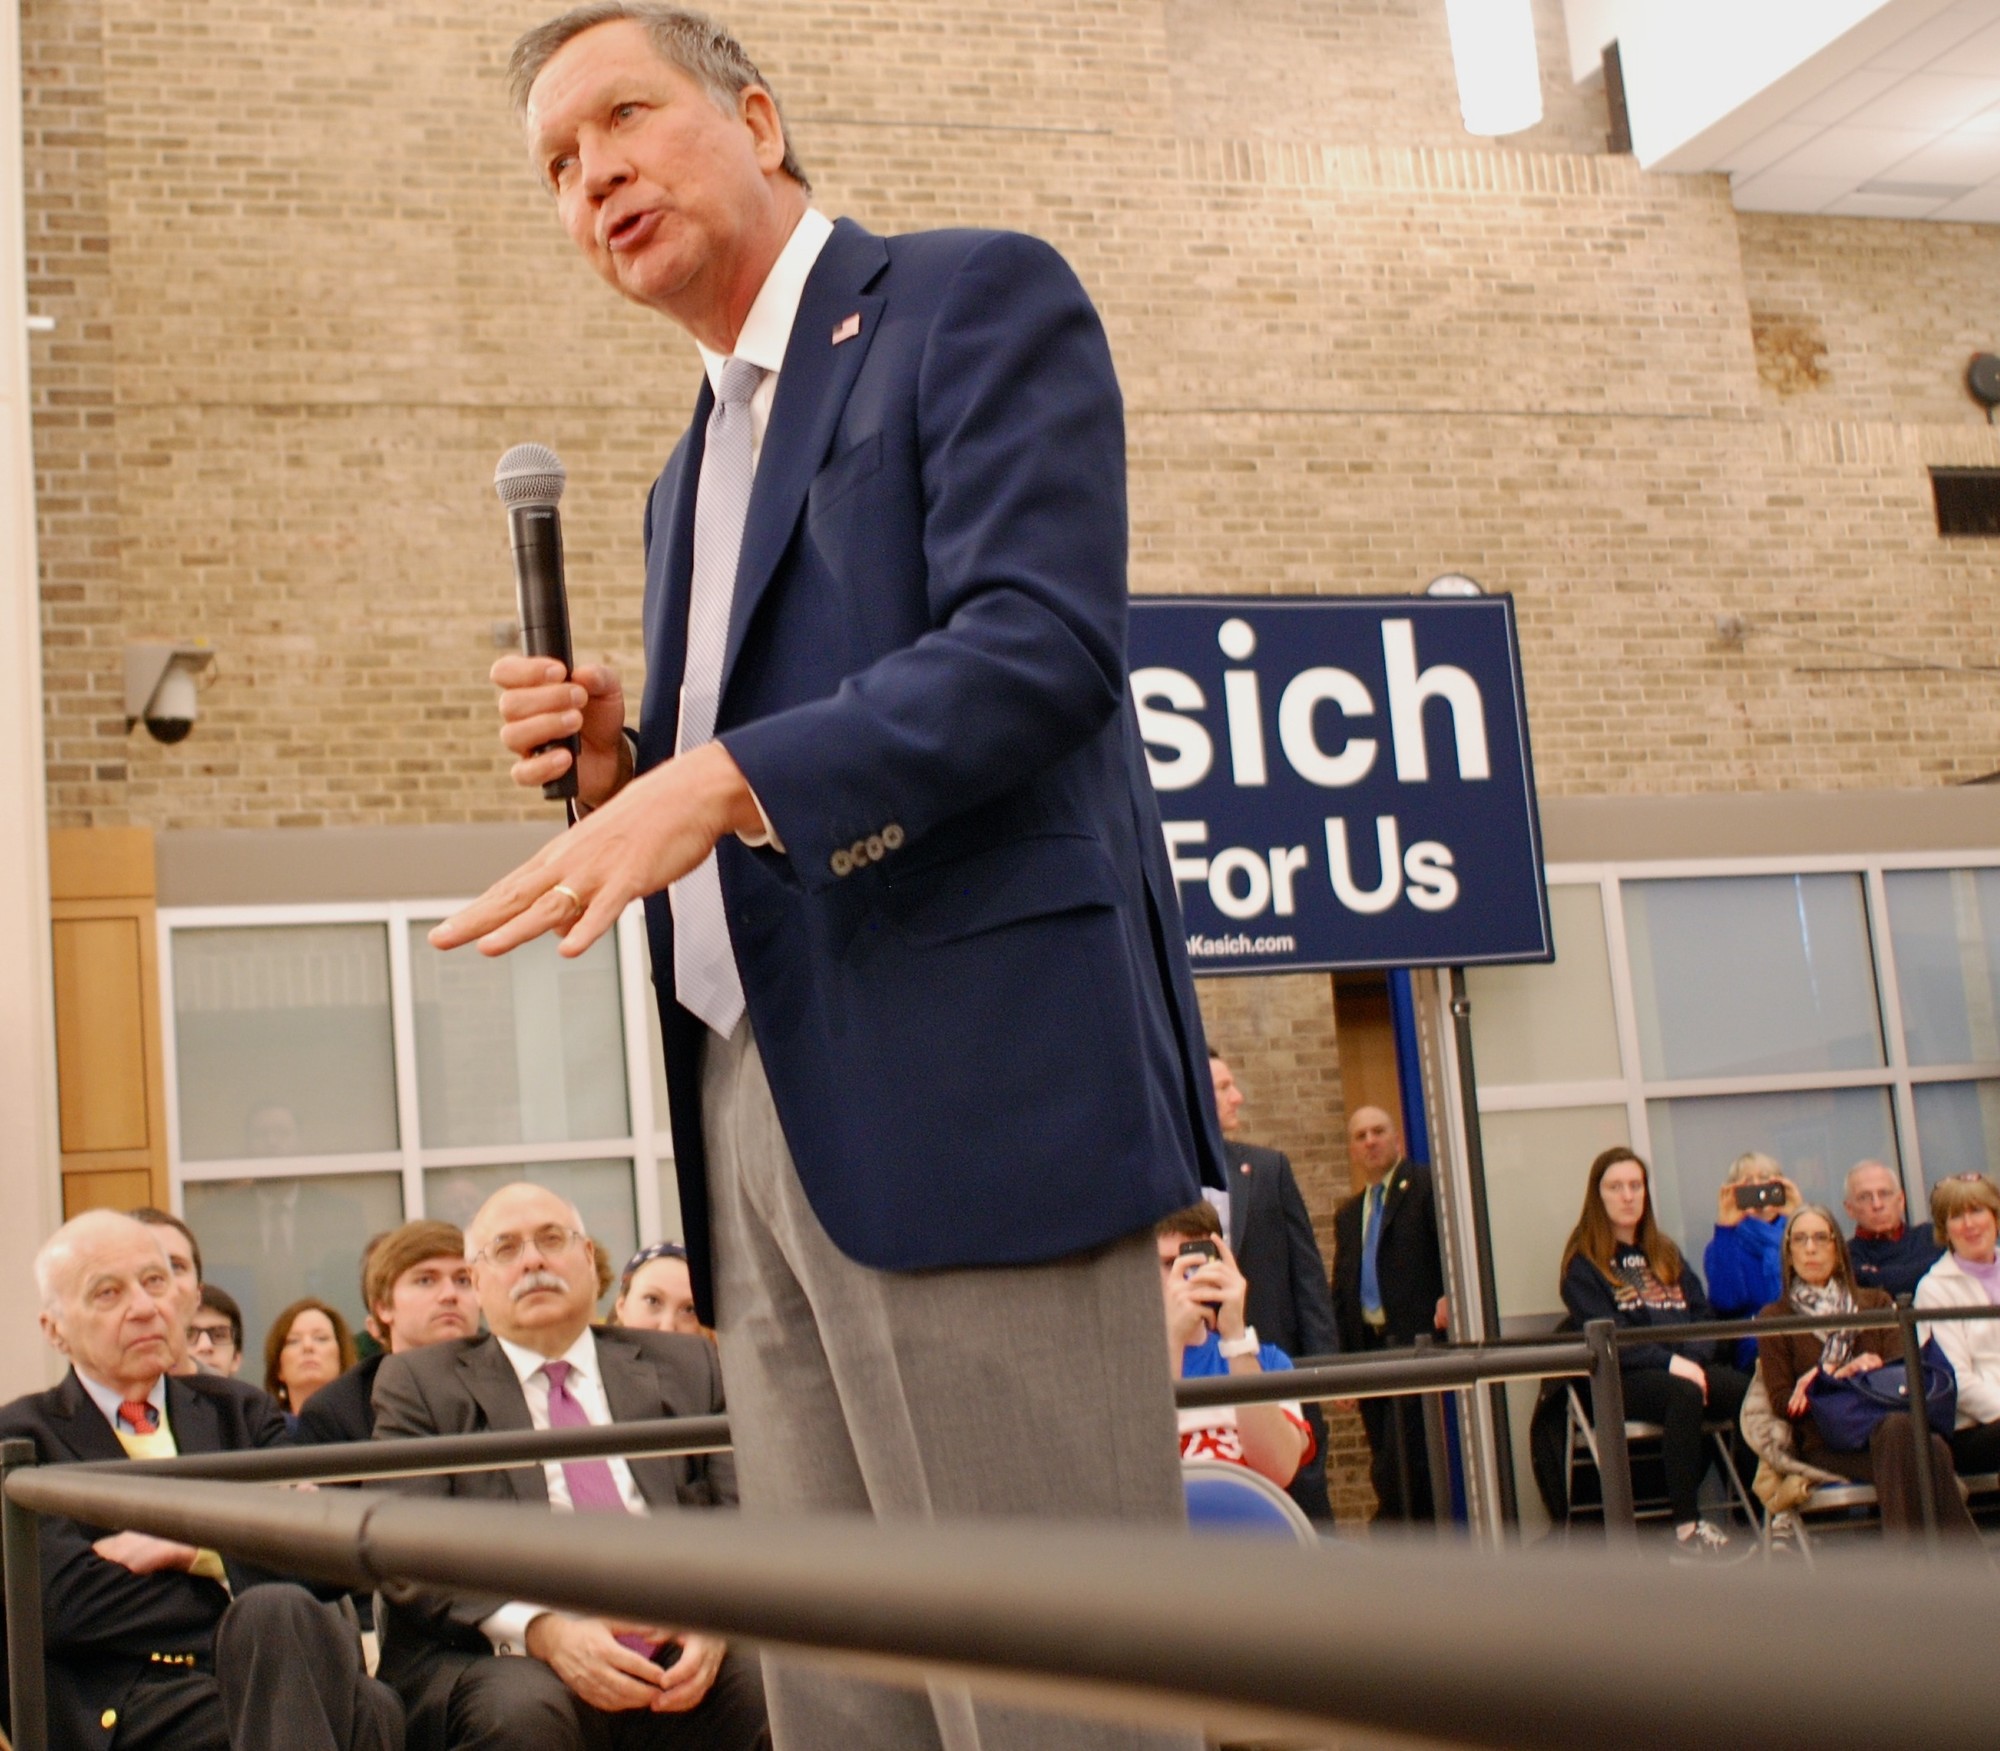 Republican presidential contender John Kasich, the Ohio governor since 2011, made his first Long Island appearance ahead of the April 19 GOP primary at Hofstra University on Monday. Photo by Scott Brinton/Herald Life